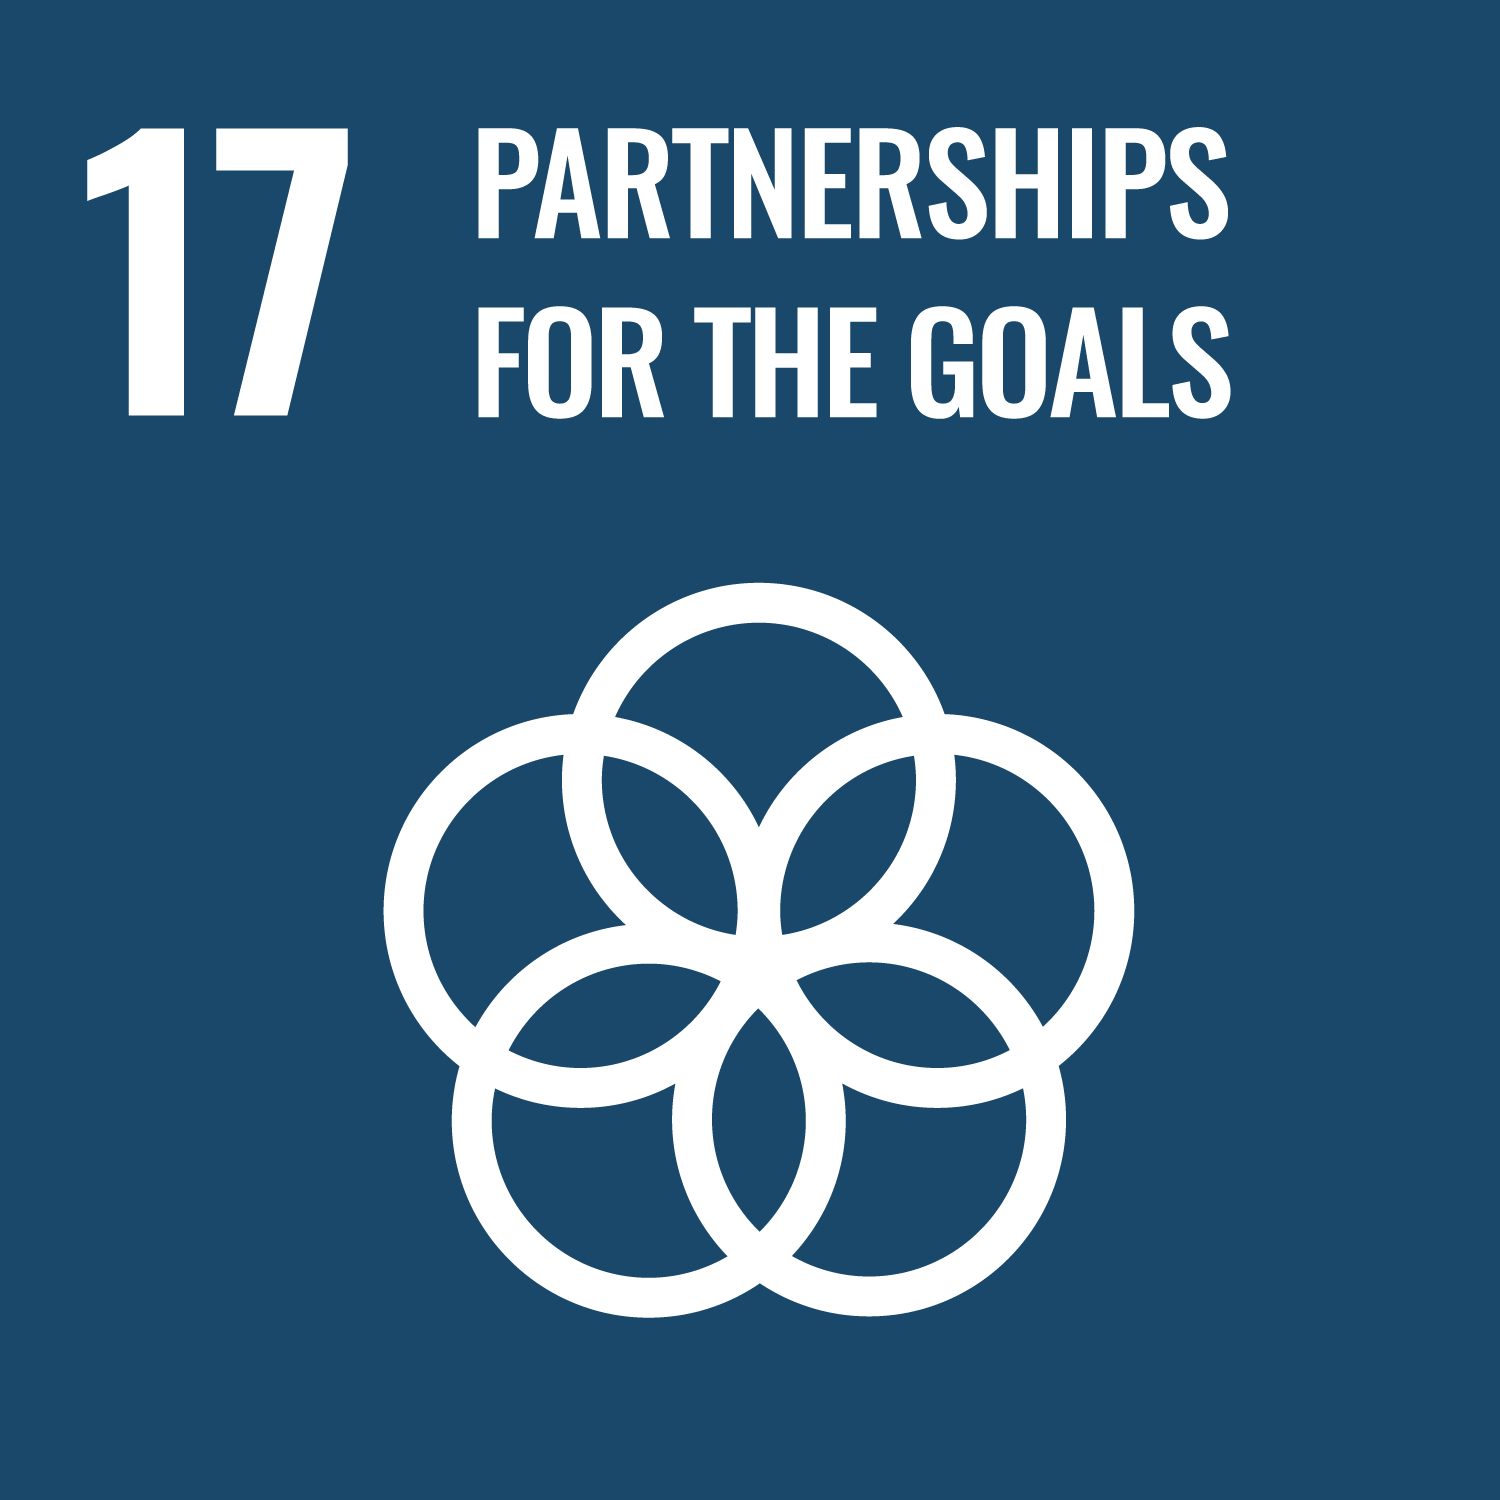 17 - Partnerships to achieve the Goal